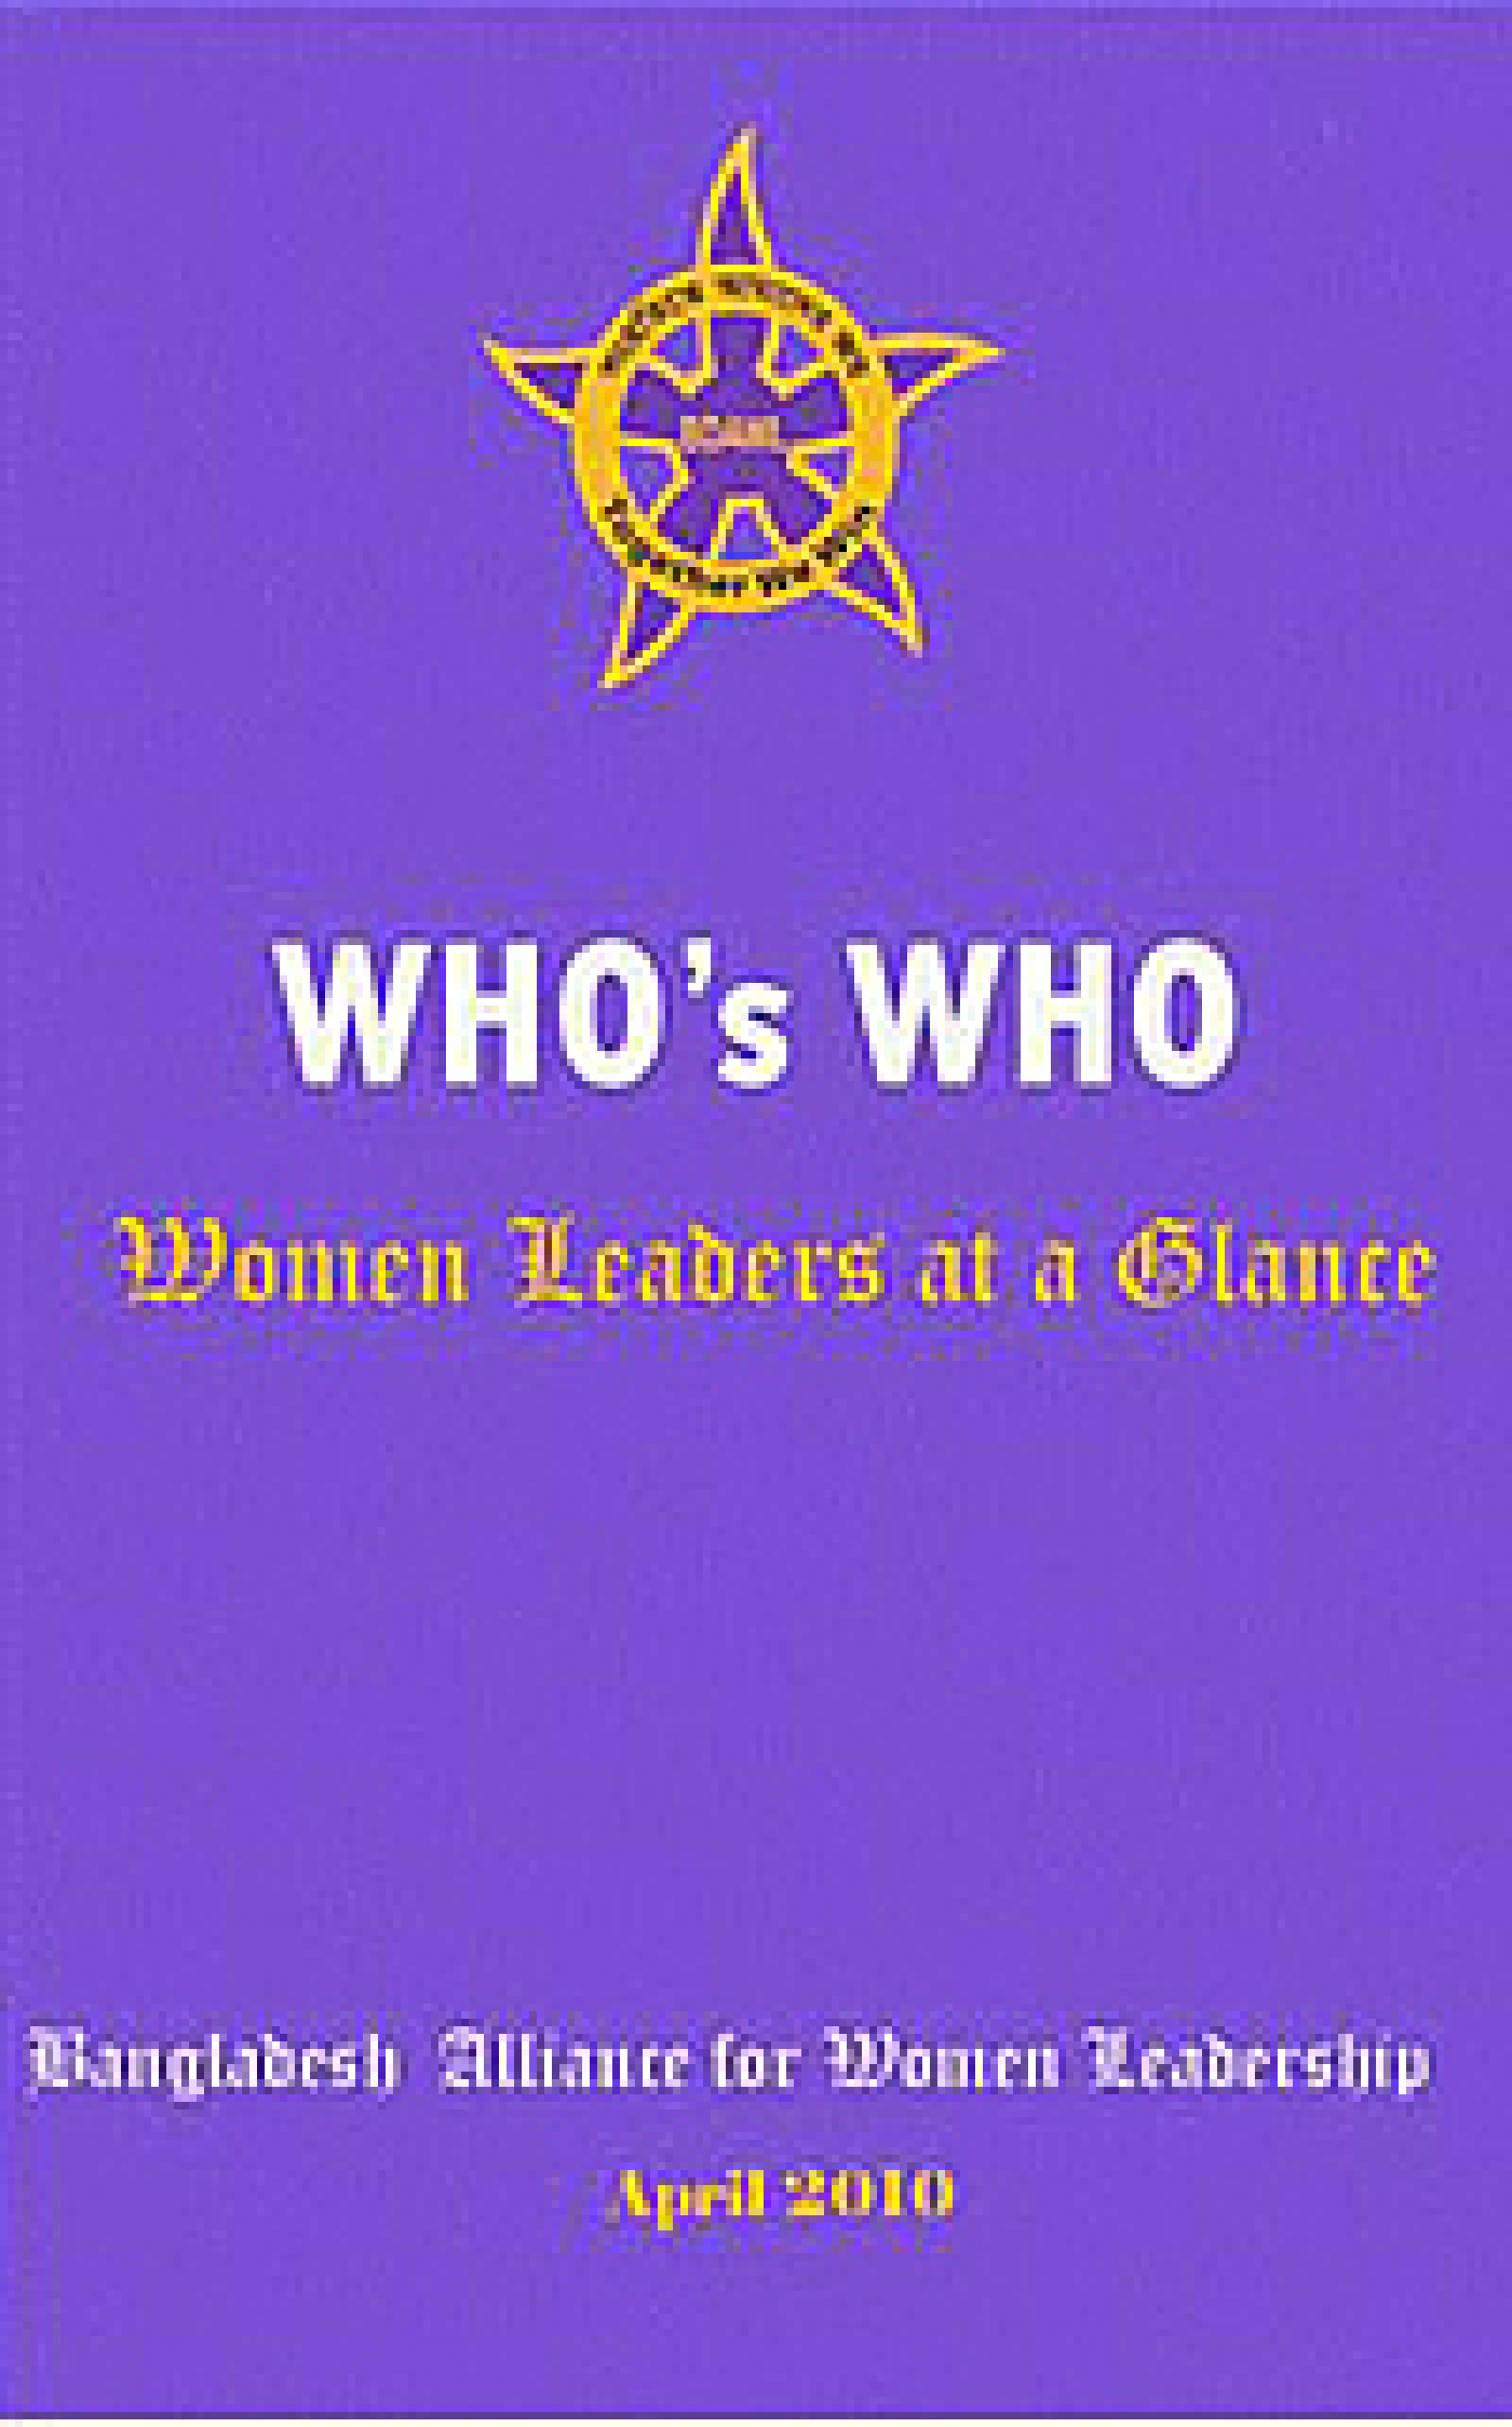 "Who's Who" of Women Leaders in Bangladesh an Inspiration for All Women